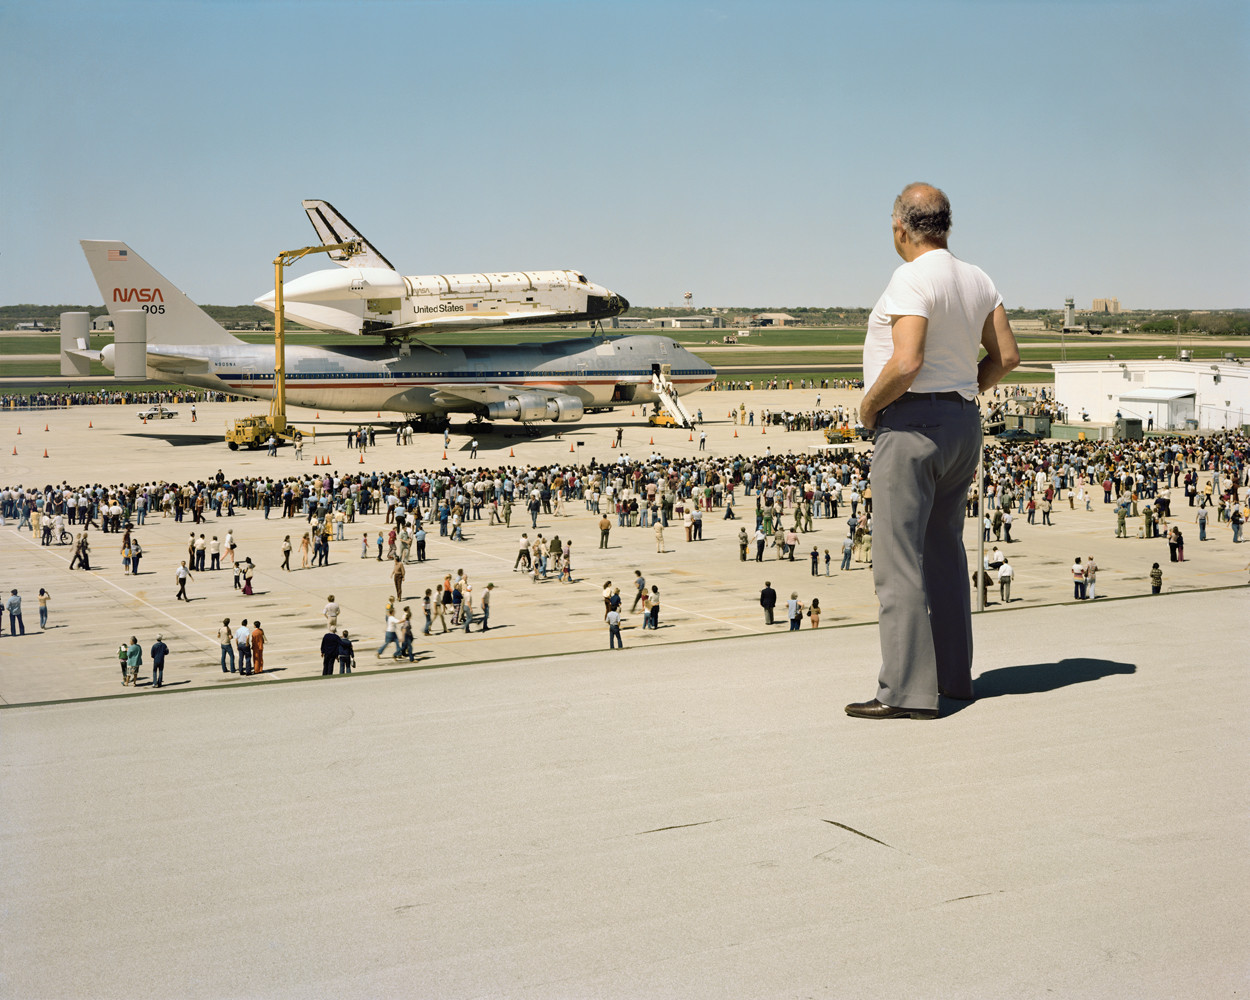 Joel Sternfeld, ‘The Space Shuttle Columbia Lands at Kelly Lachland Air Force Base, San Antonio, Texas, March’, 1979, Archival pigment print